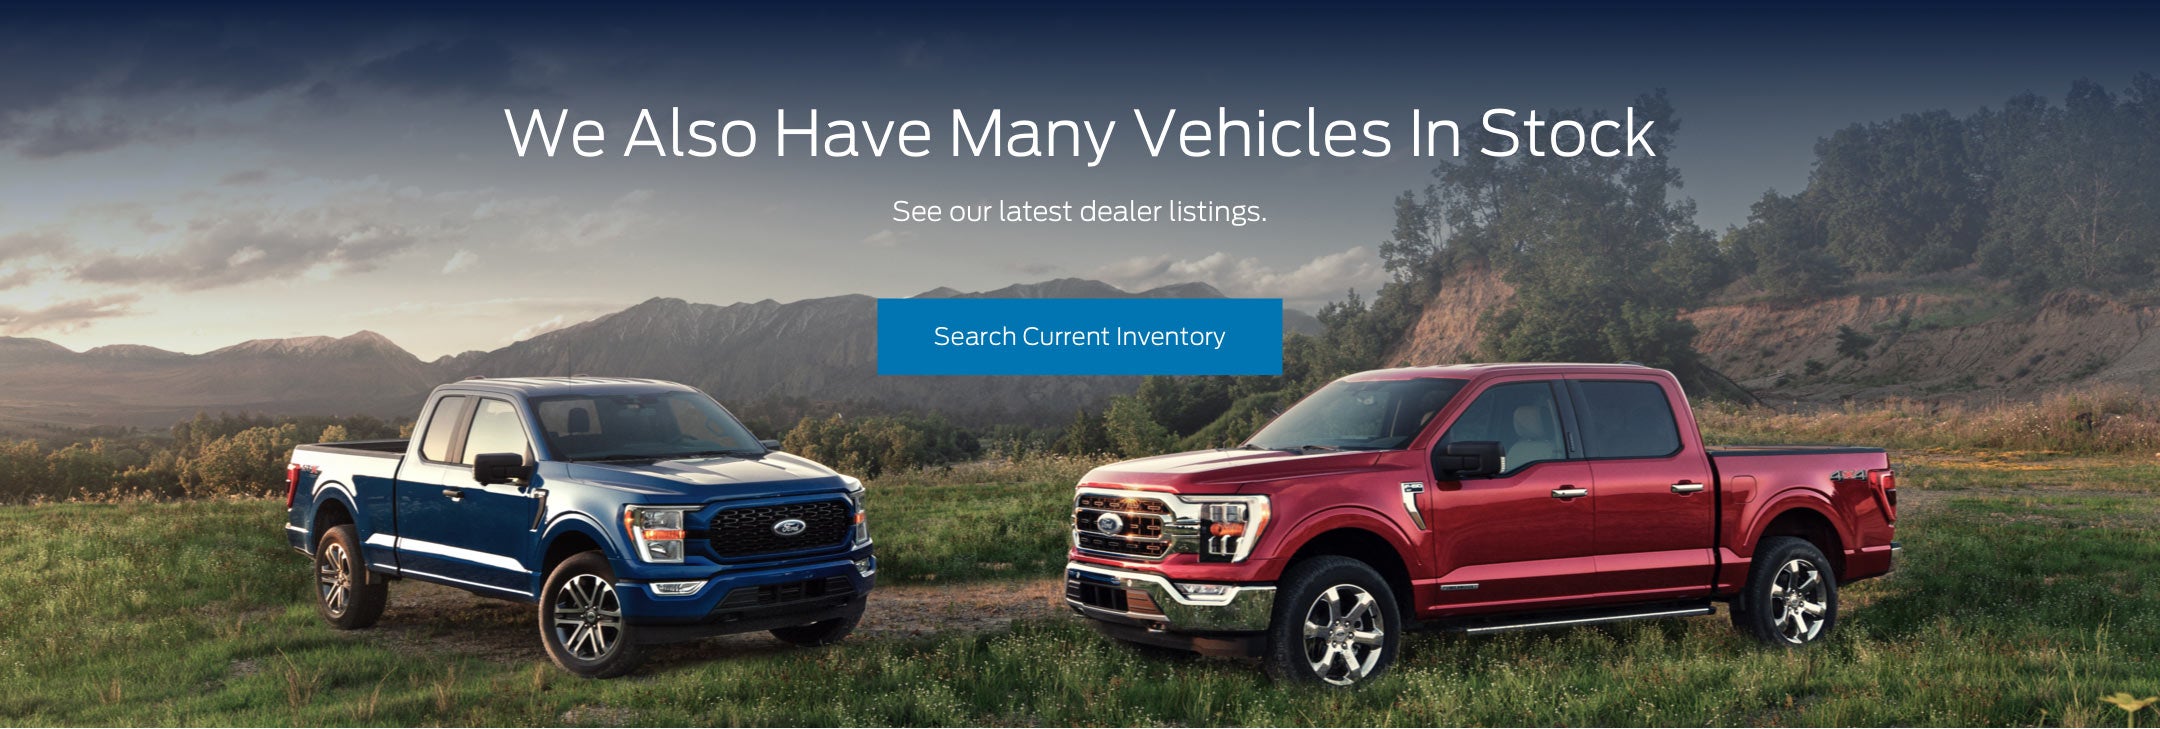 Ford vehicles in stock | Lynch Ford of Mukwonago in Mukwonago WI